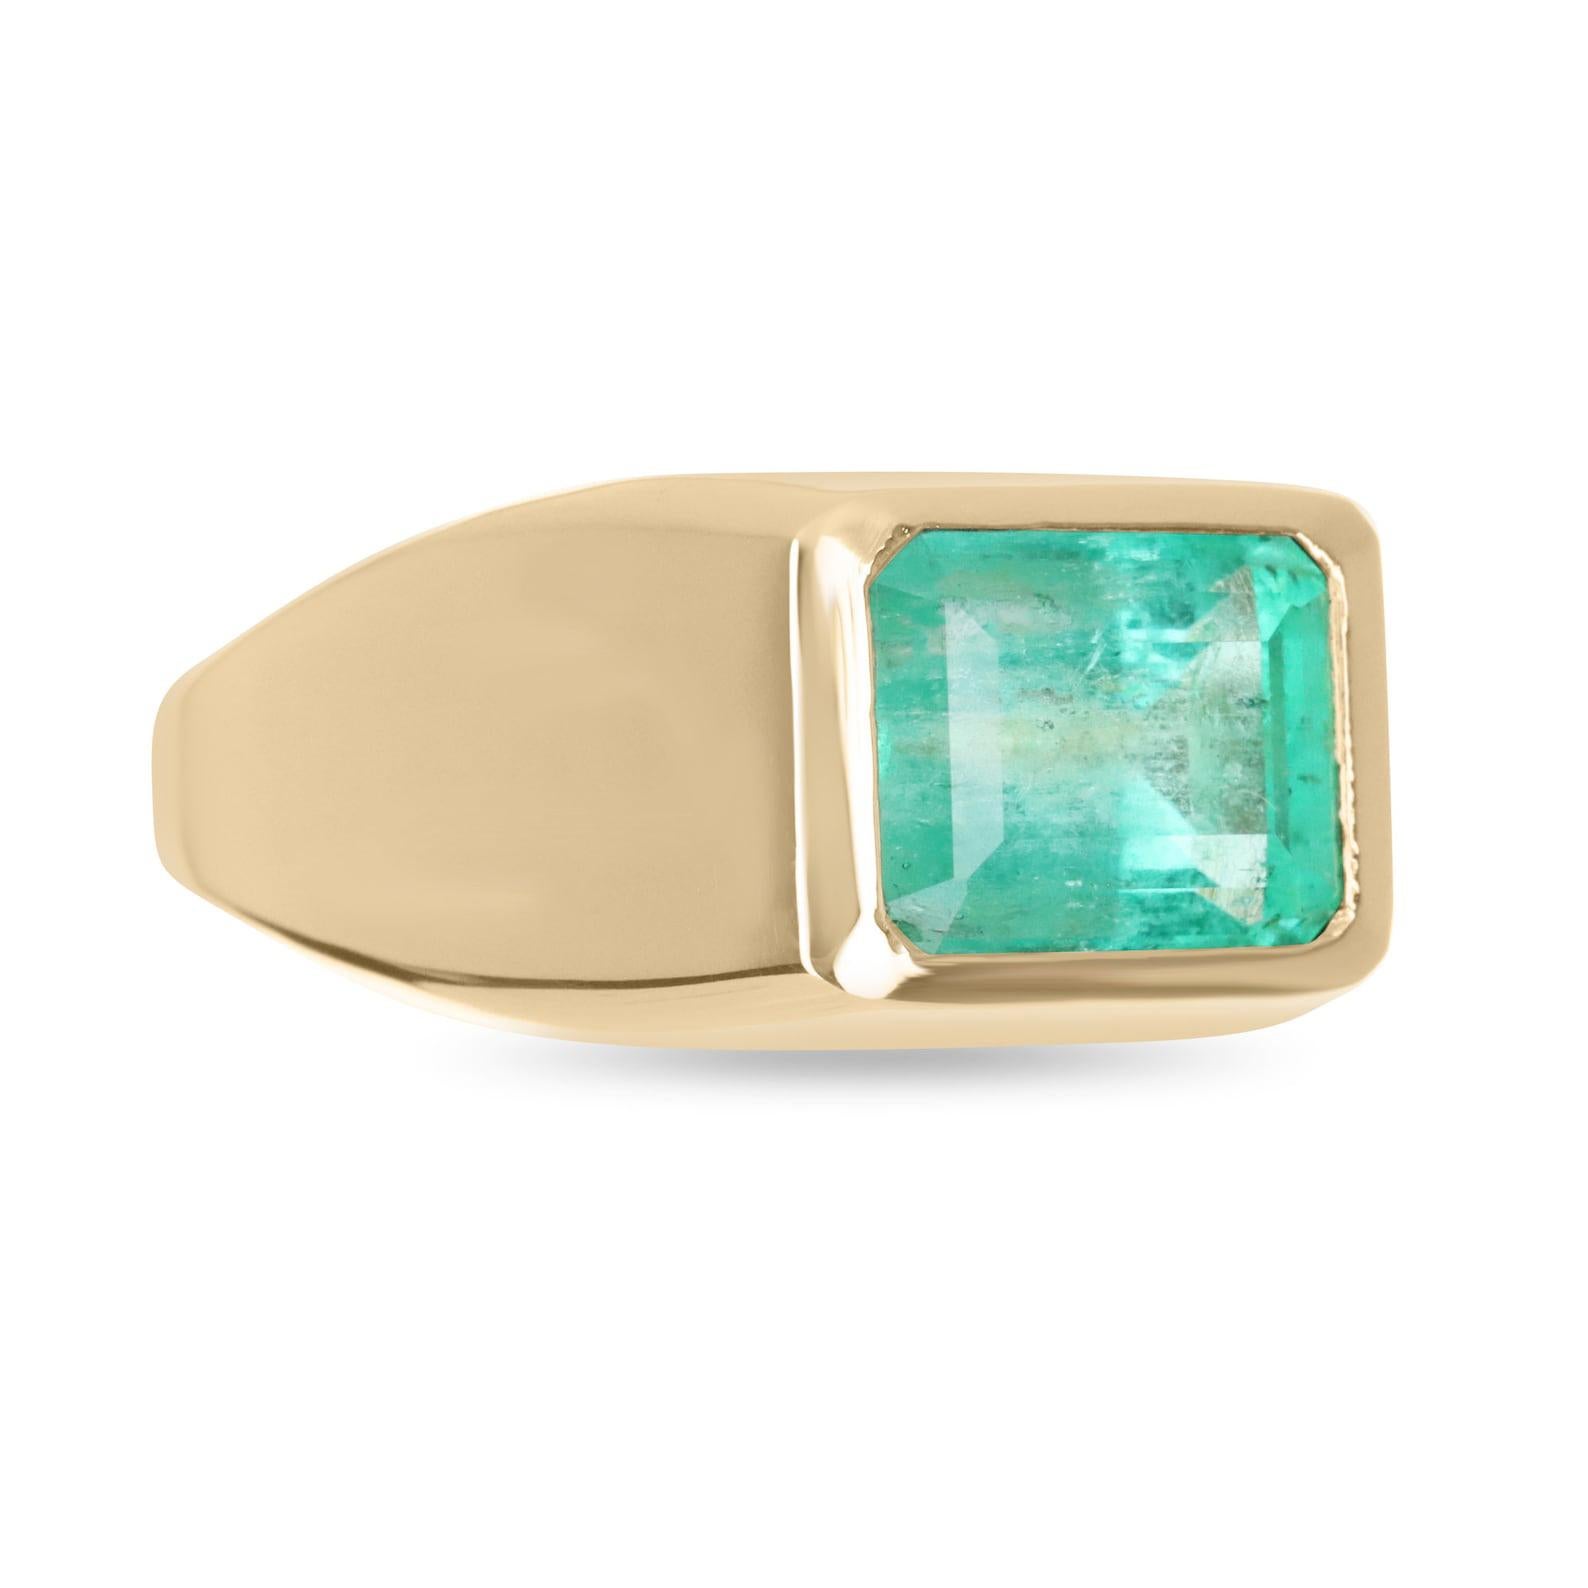 Displayed is a stunning, East to West, Colombian emerald signet bezel ring in 14K yellow gold. This gorgeous statement-size solitaire ring carries a 3.68-carat ethically mined emerald in a secure golden bezel setting. Fully faceted, this gemstone